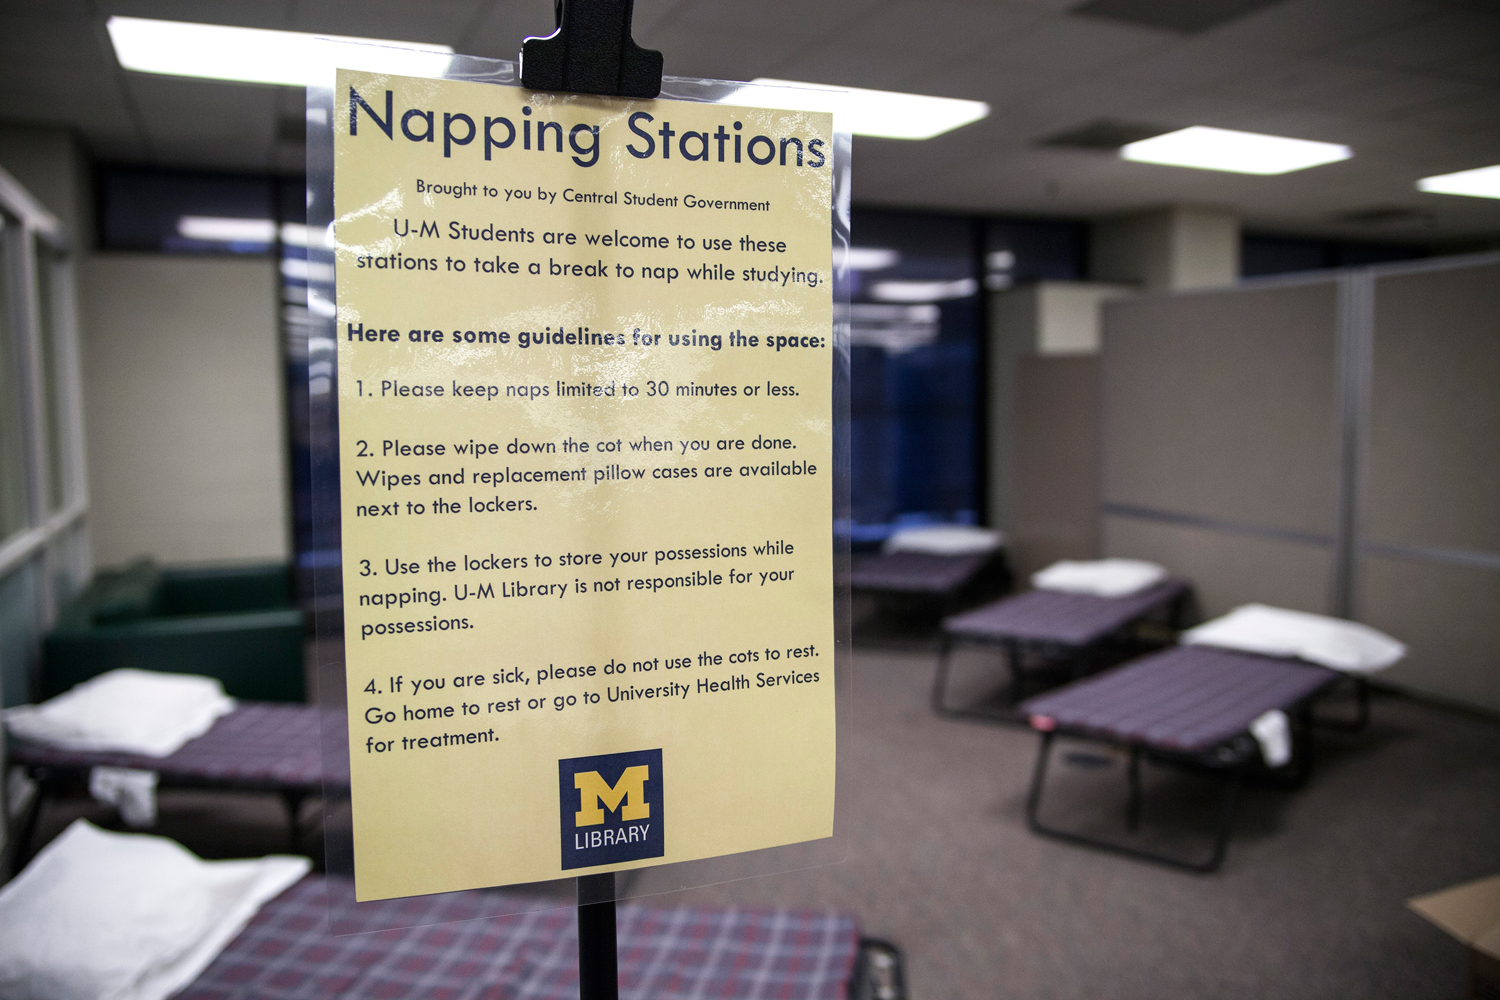 An April 29, 2014 photo shows the napping station that was implemented at the Shapiro Undergraduate Library at the University of Michigan in Ann Arbor, Michigan. (The Michigan Daily, Allison Farrand – AP)